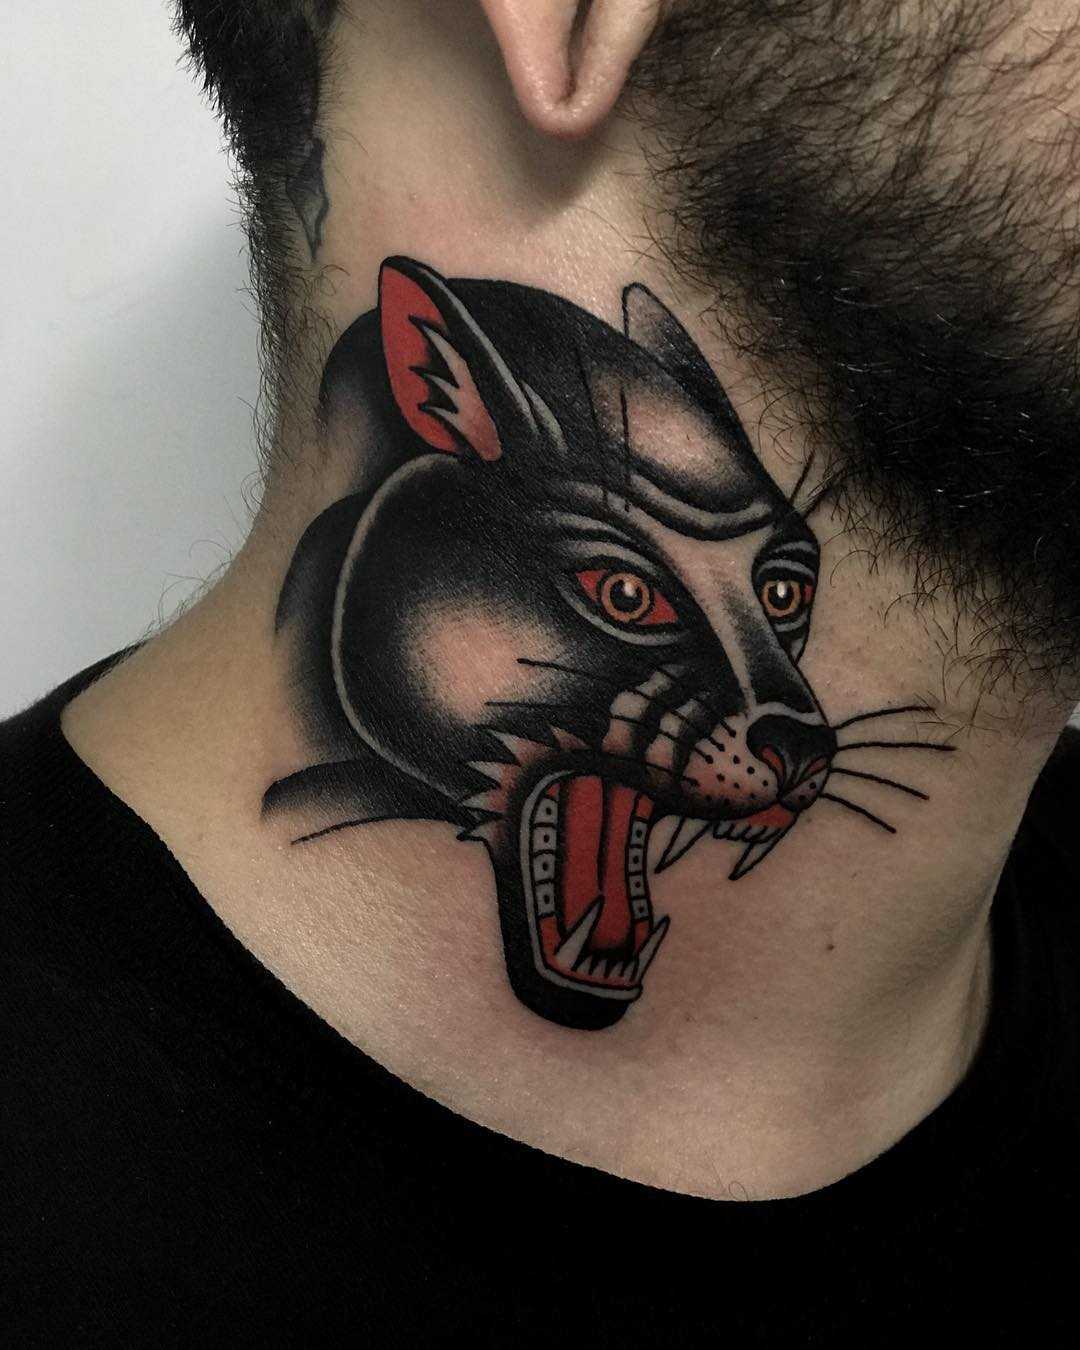 Panther tattoo on a neck by Javier Betancourt